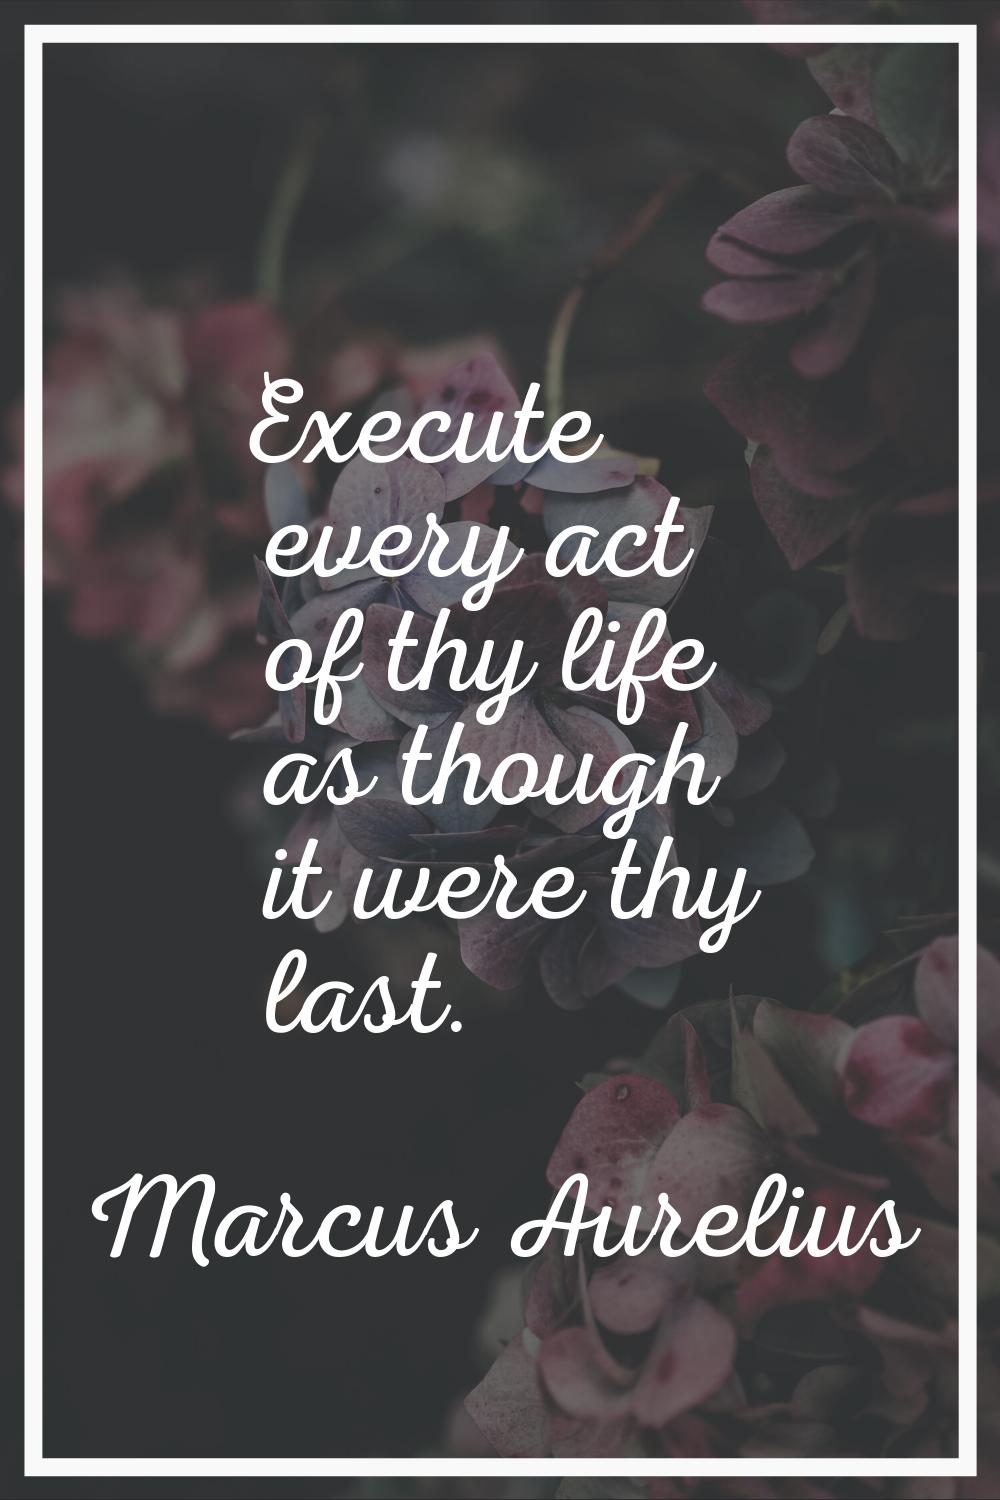 Execute every act of thy life as though it were thy last.